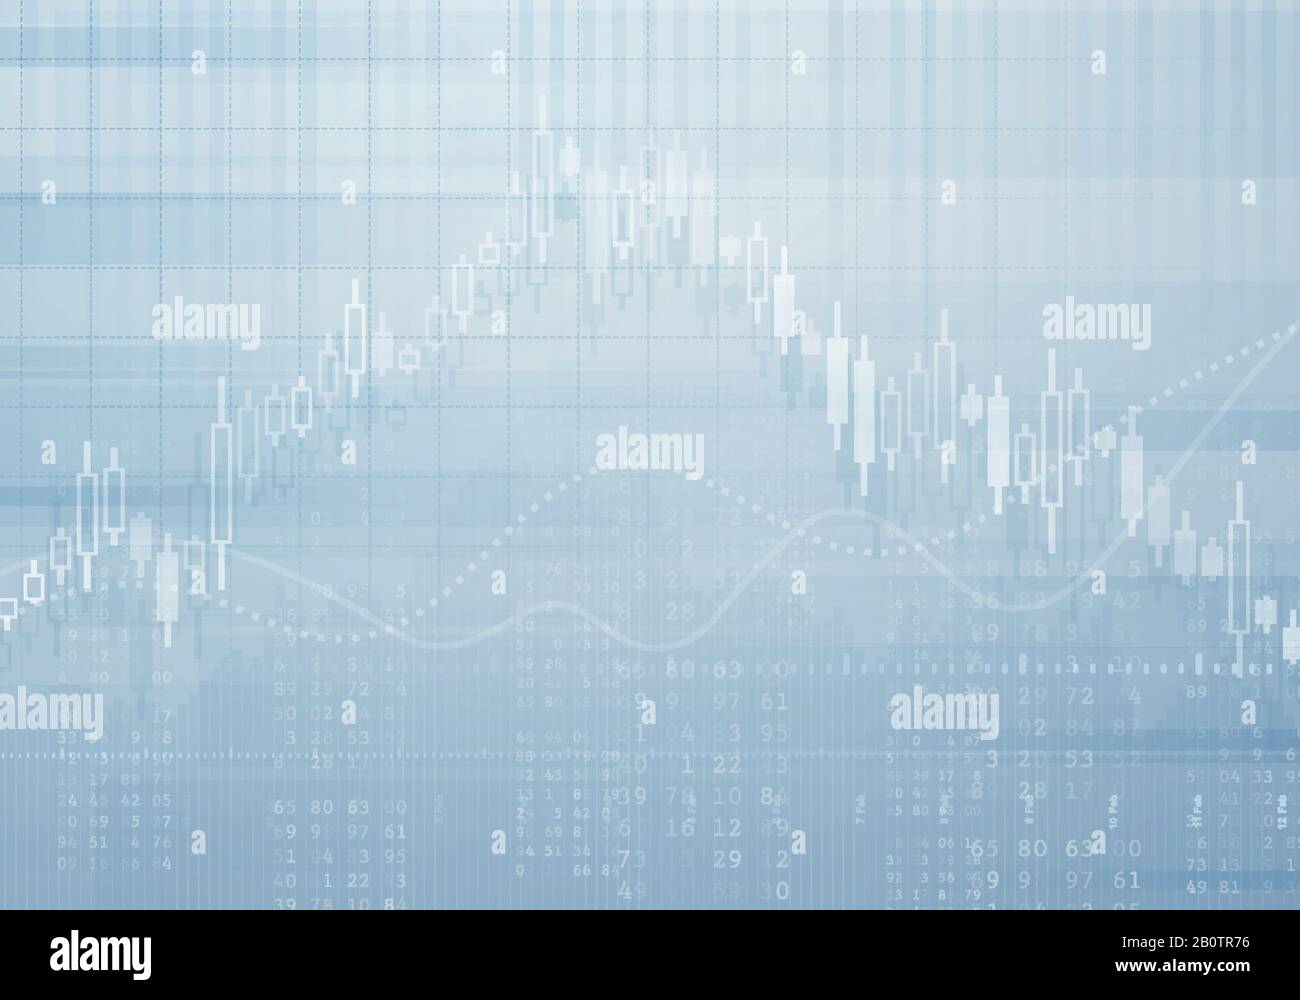 Banking business graph vector background. Investment and economy concept with financial chart. Financial graph and business chart stock illustration Stock Vector